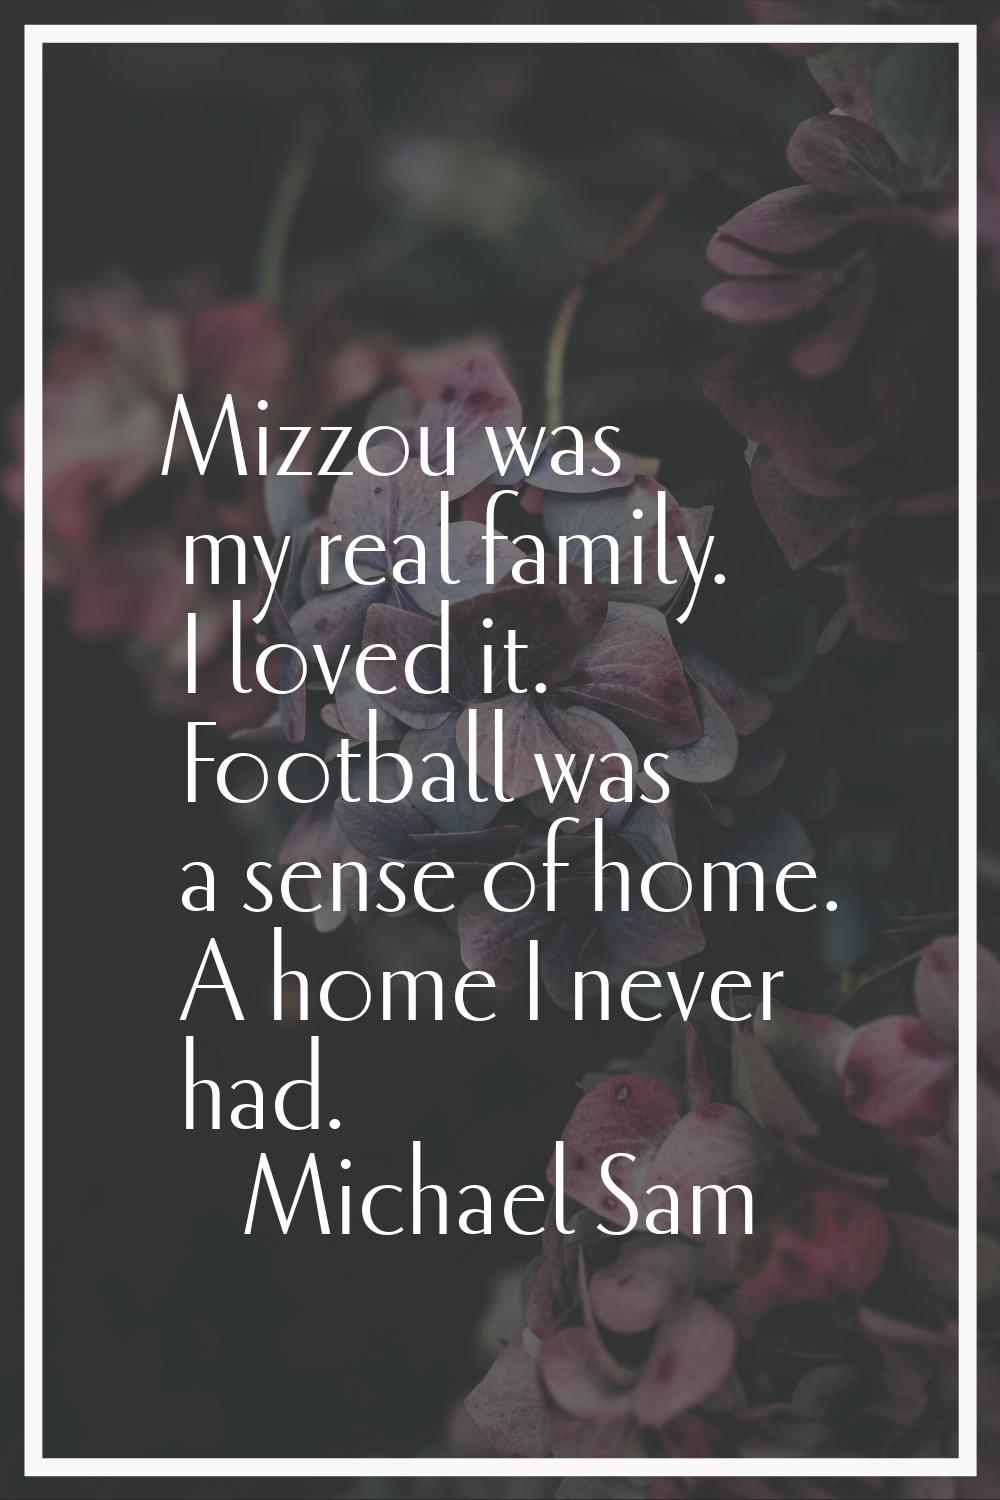 Mizzou was my real family. I loved it. Football was a sense of home. A home I never had.